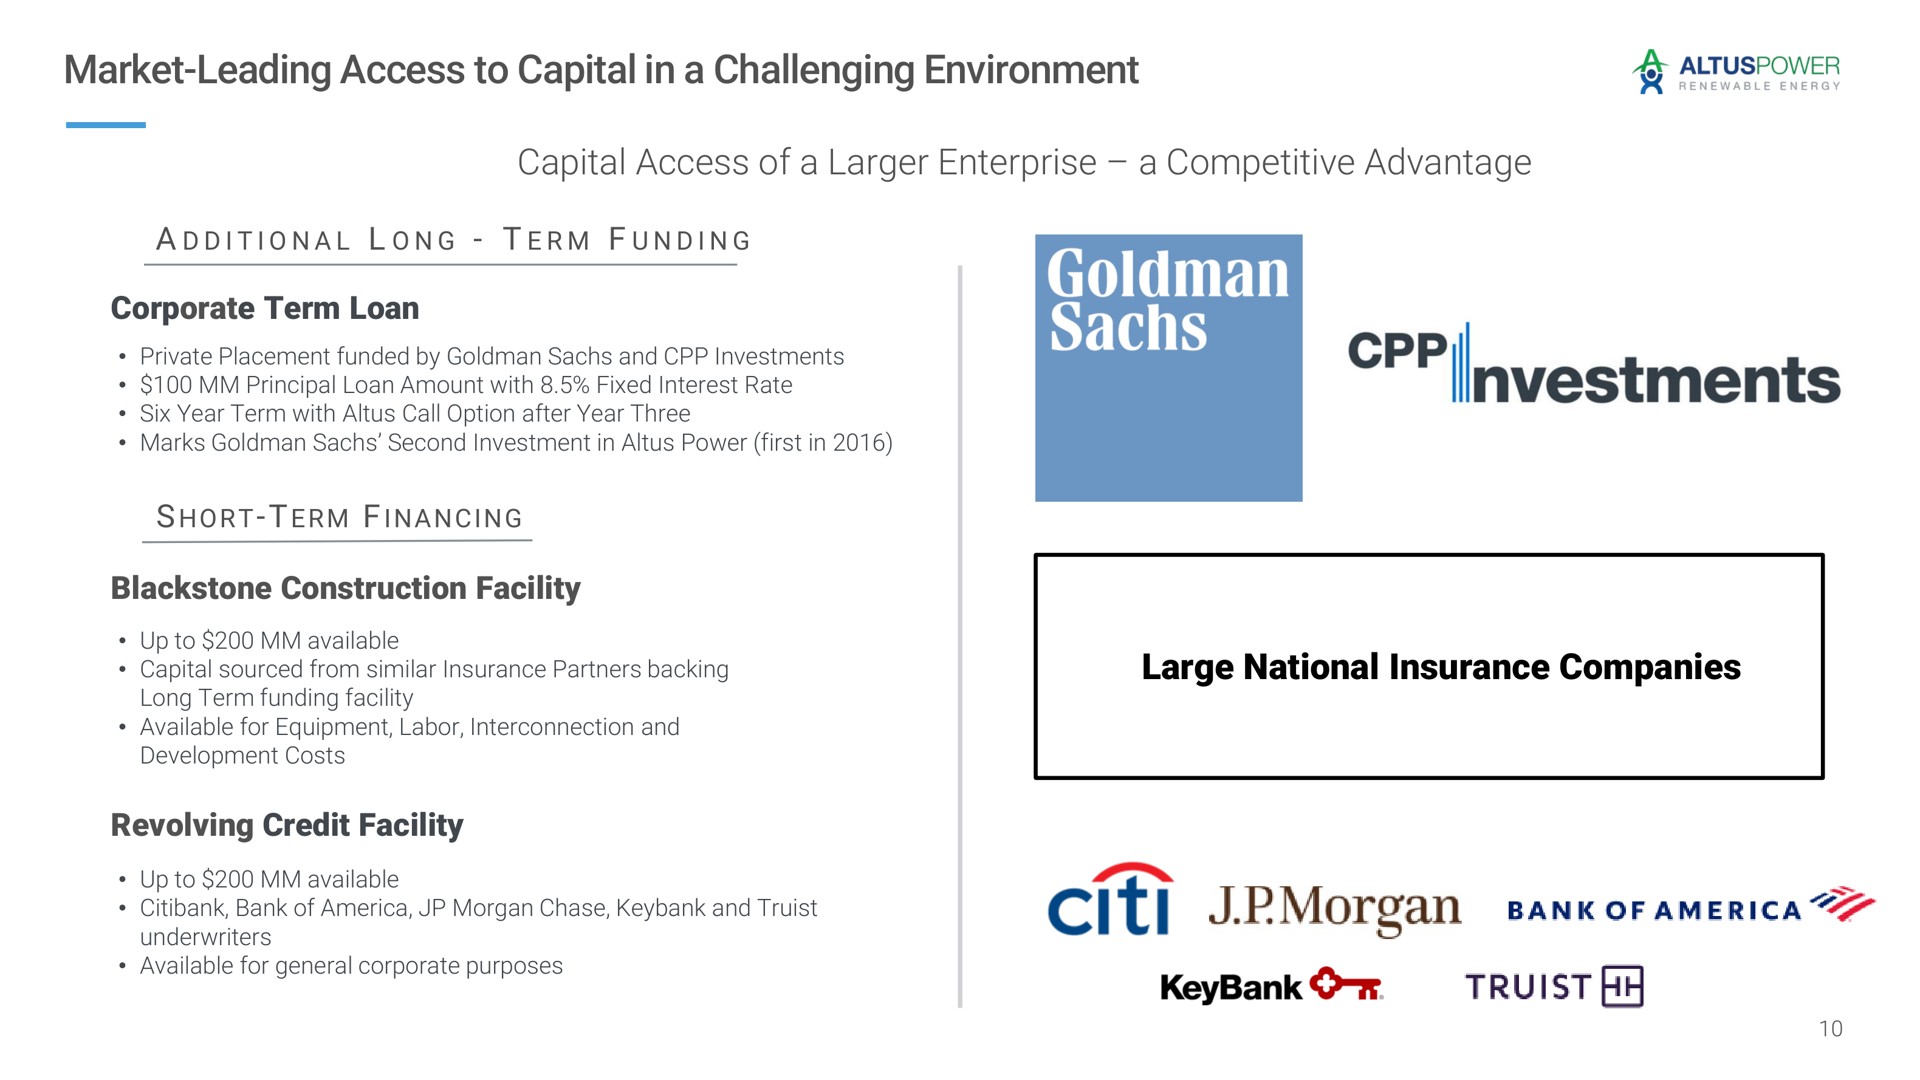 market leading access to capital in a challenging environment capital access of a enterprise a competitive advantage large national insurance companies additional long term funding morgan bank | Altus Power